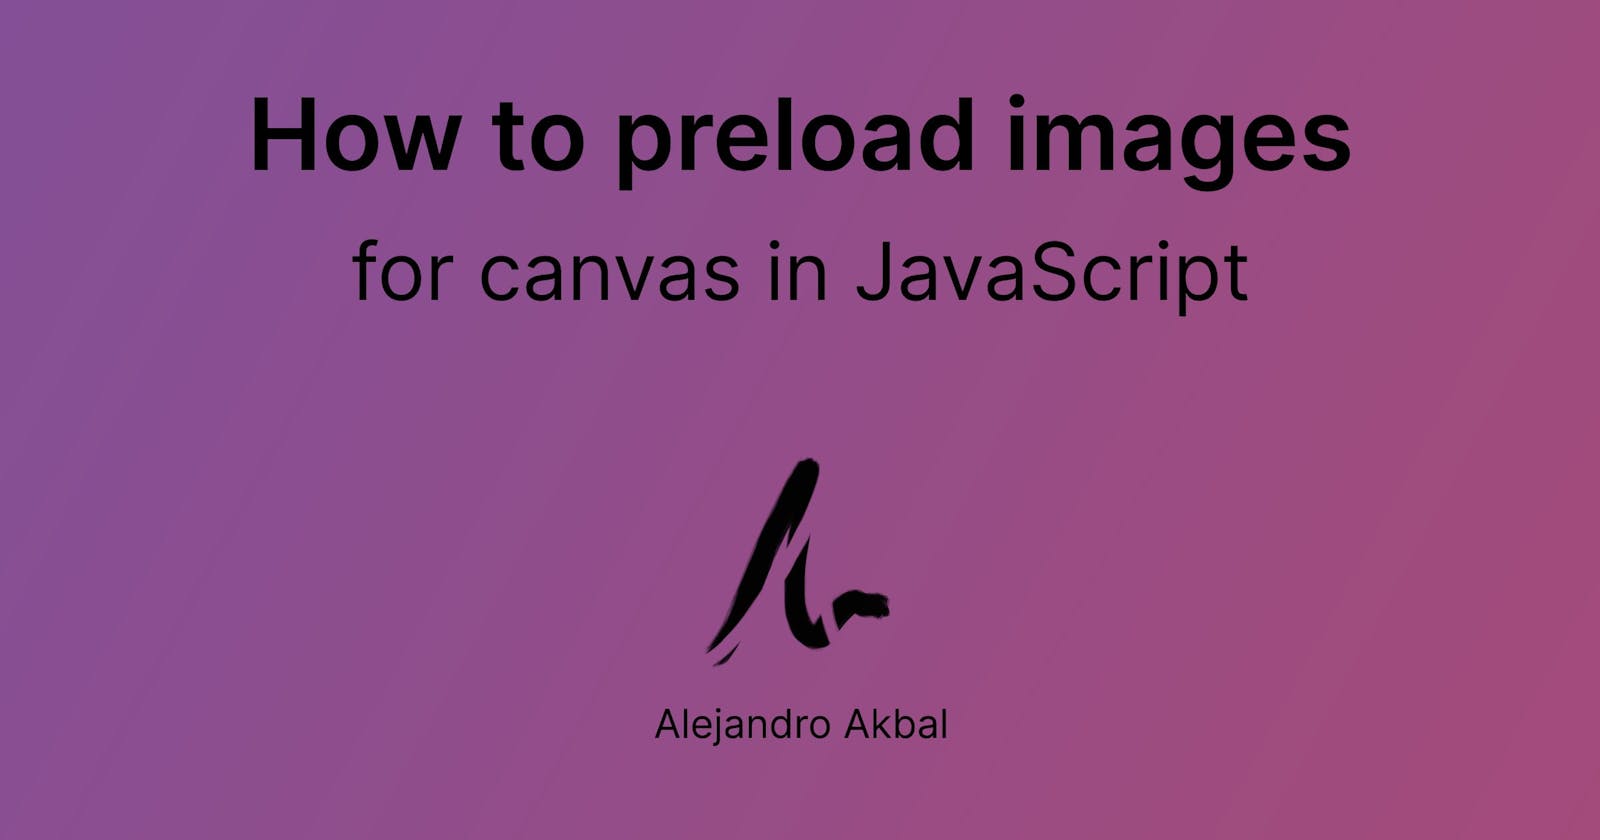 How to preload images for canvas in JavaScript